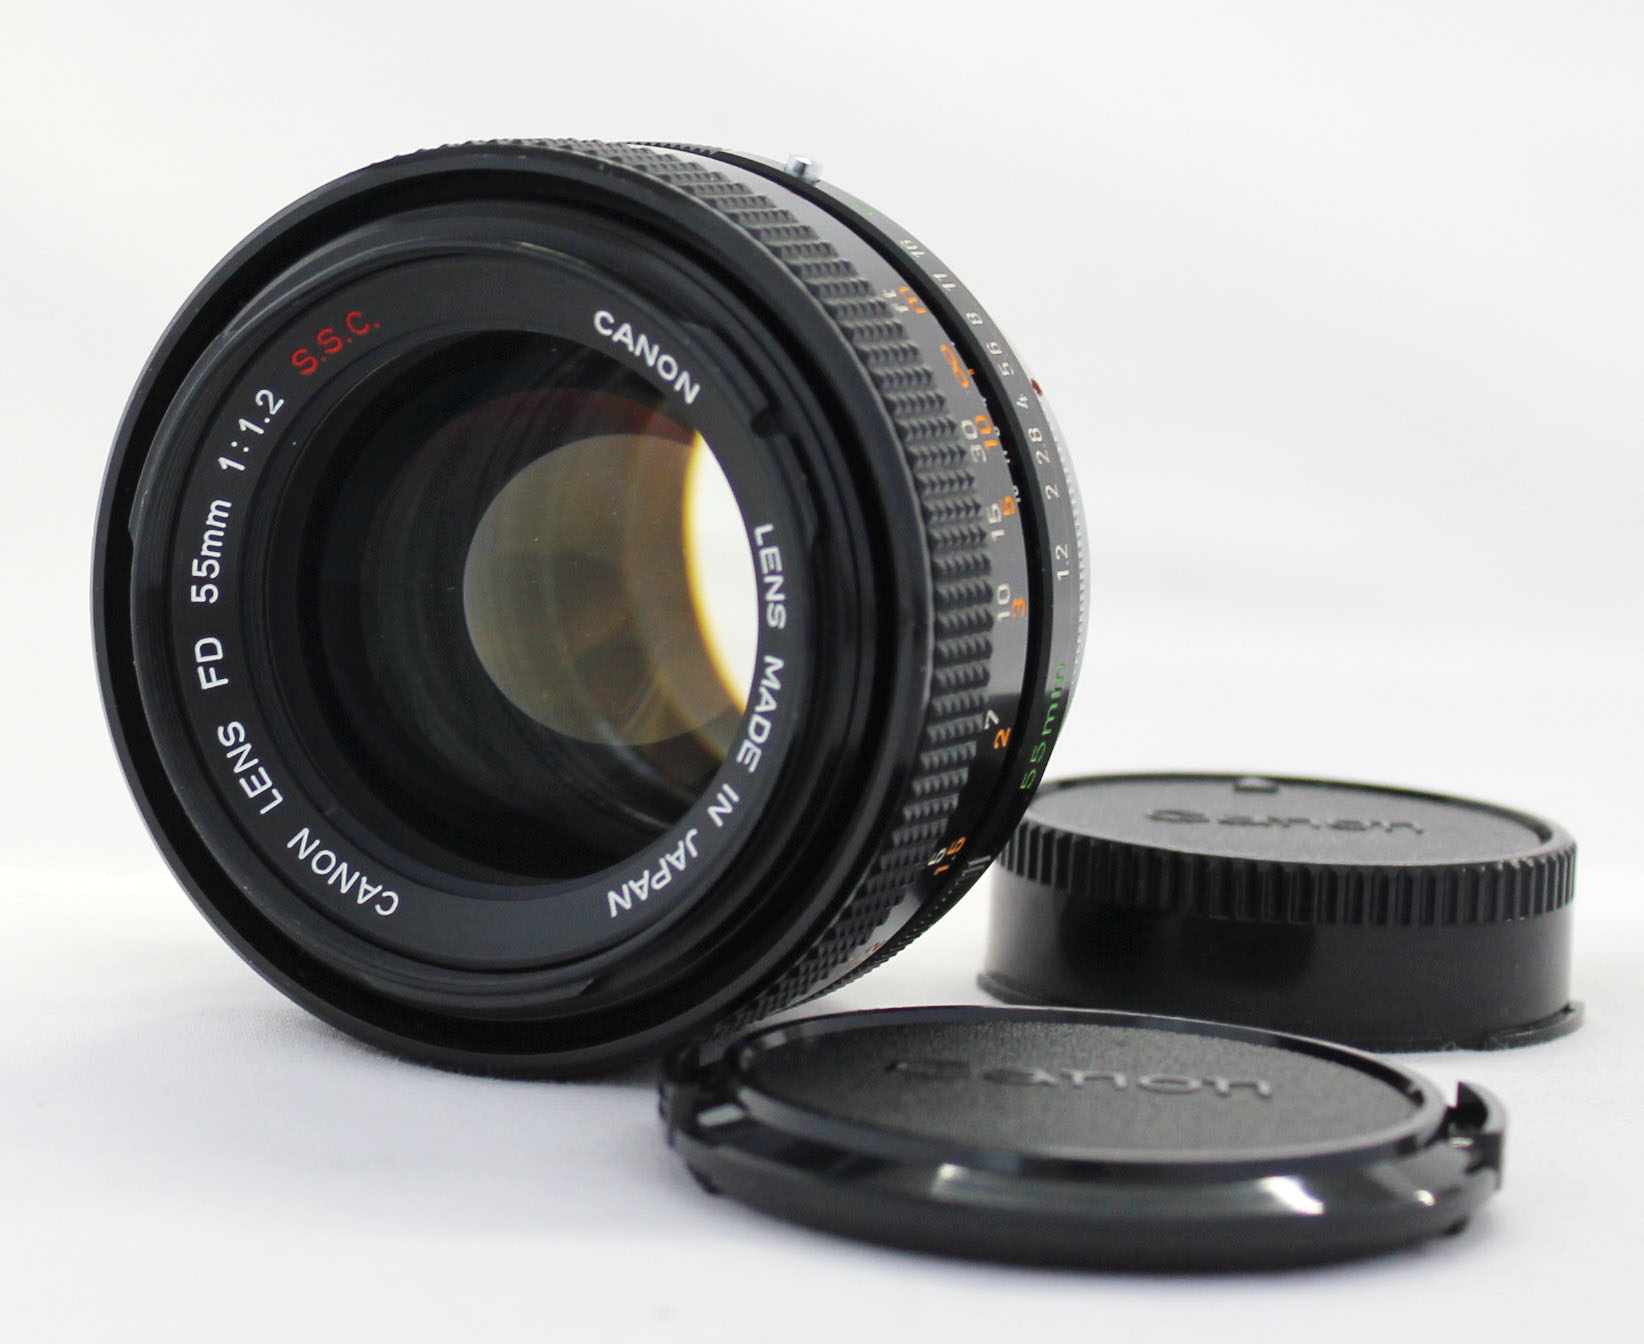 Japan Used Camera Shop | [Rare "O"] Canon FD 55mm F/1.2 S.S.C. ssc MF Standard Prime Lens from Japan